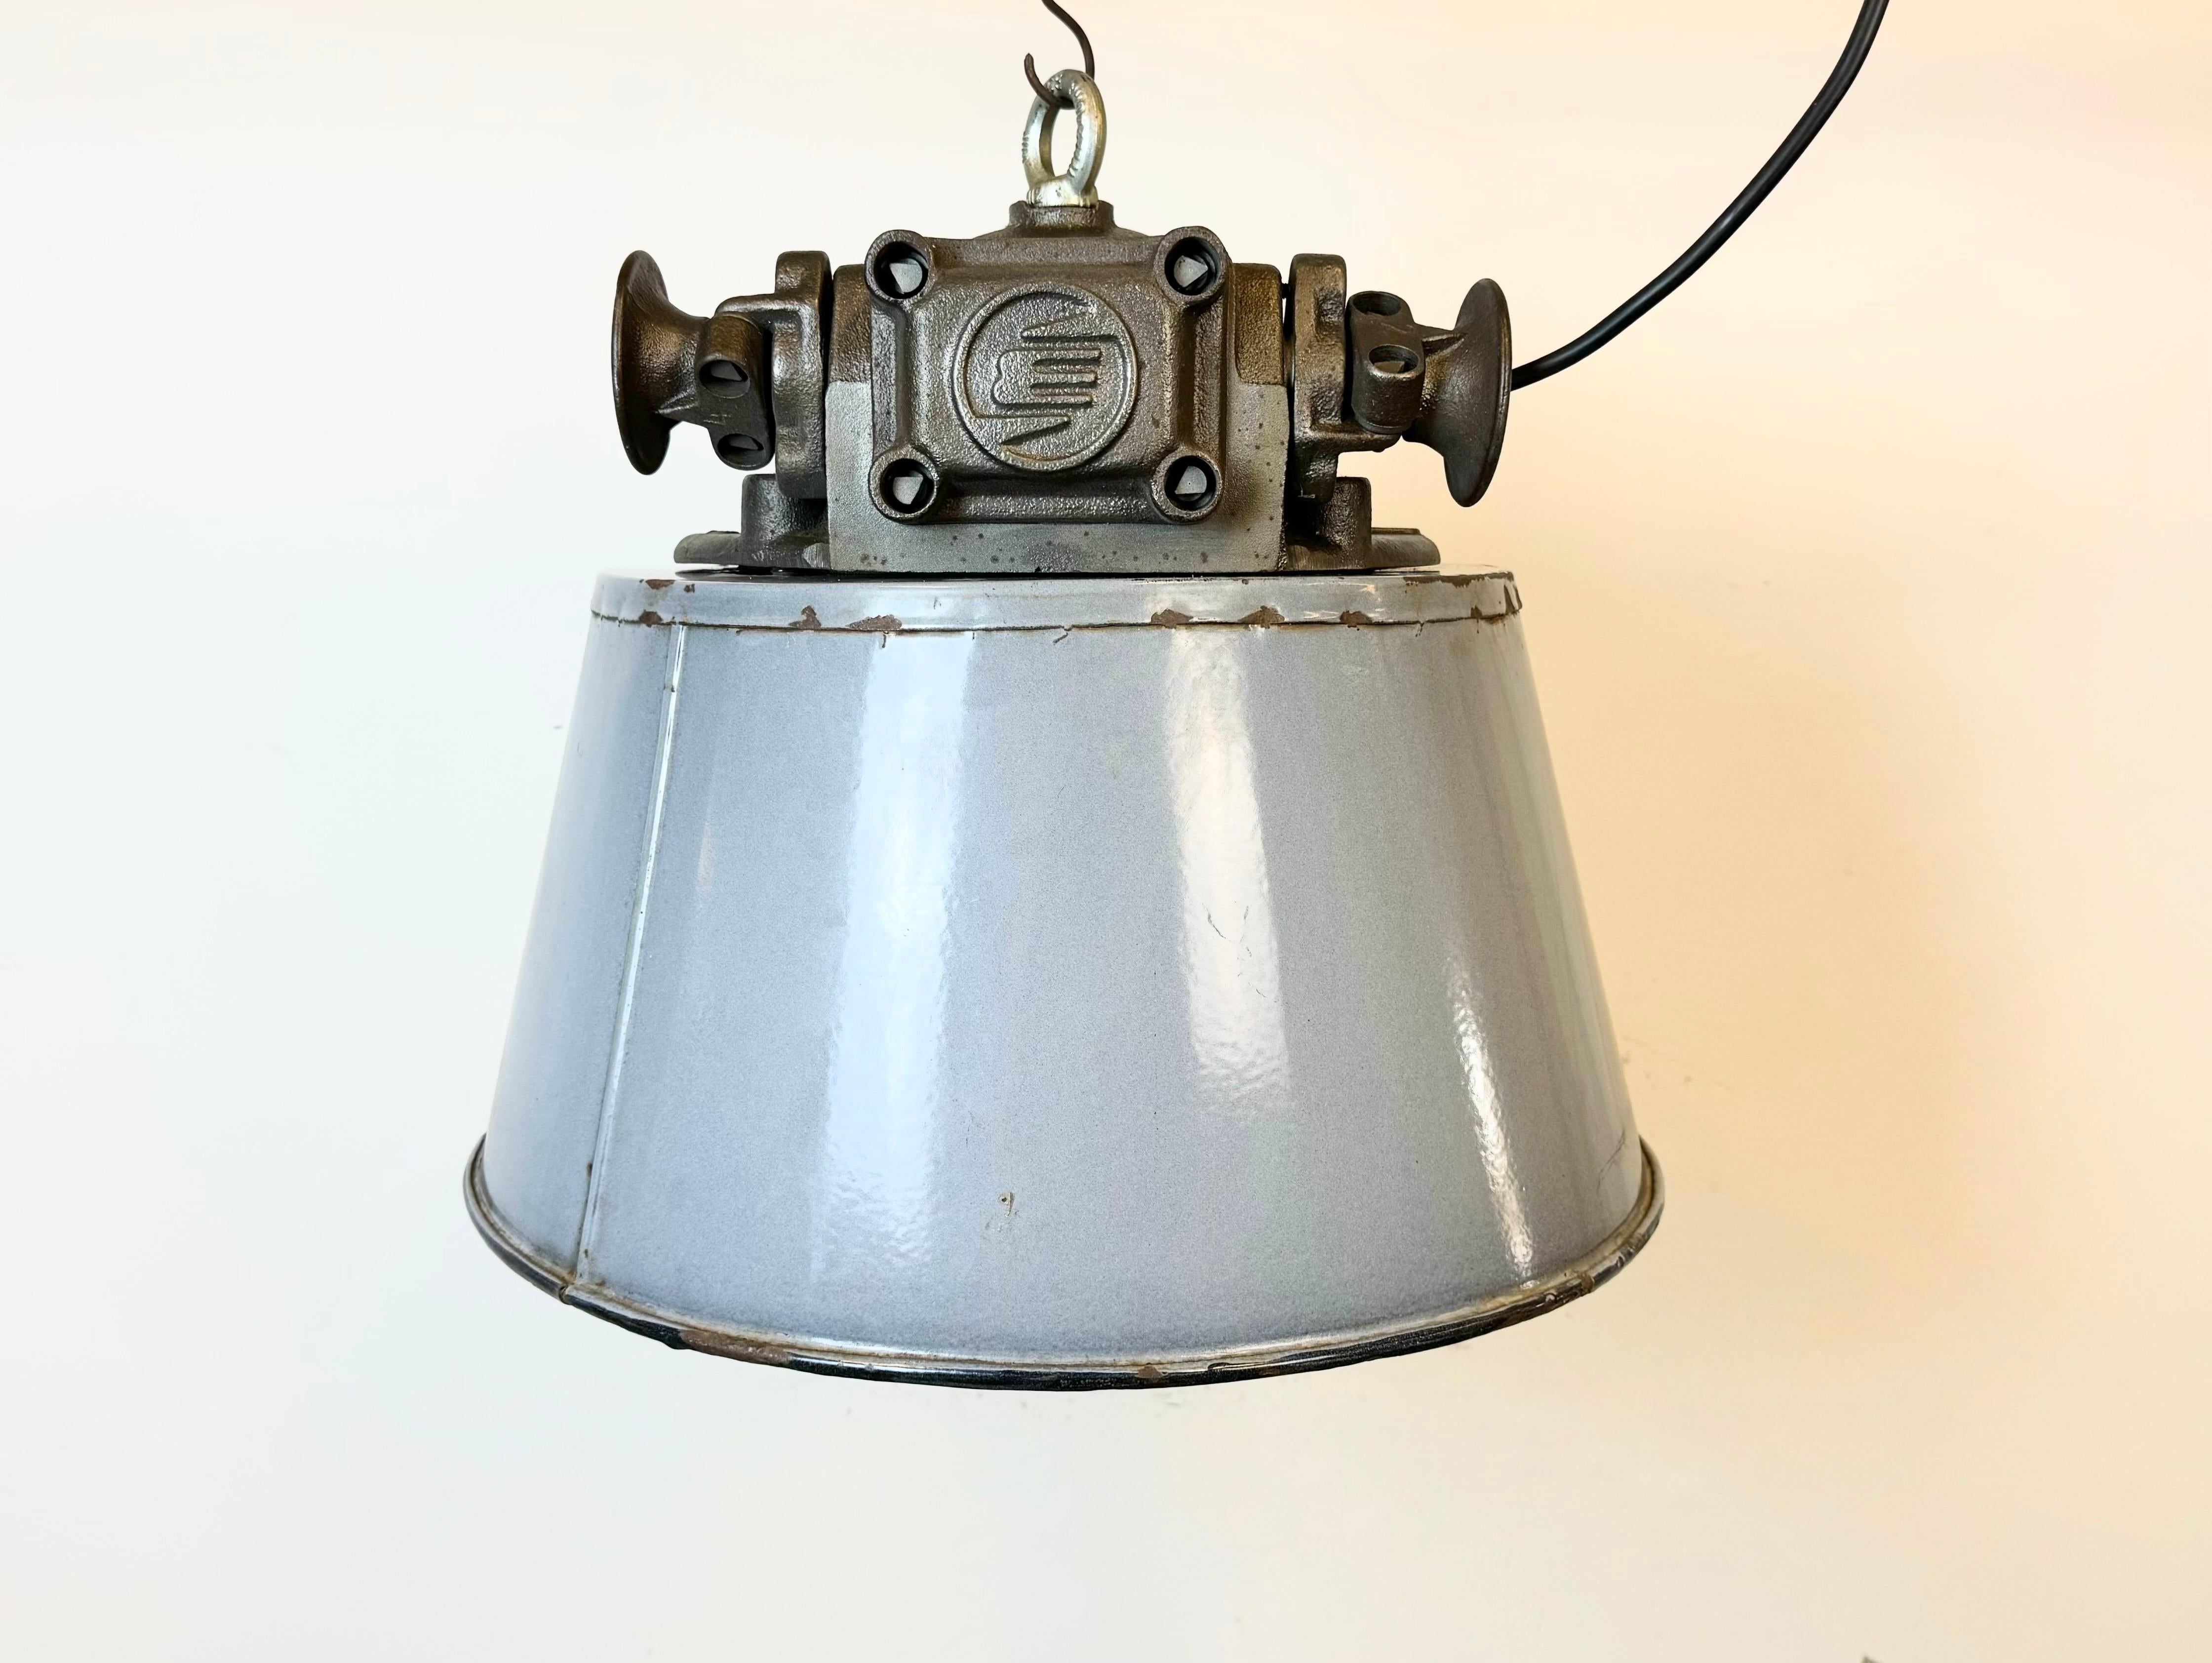 Large heavy industrial hanging lamp made by Elektrosvit in former Czechoslovakia during the 1960s. It features a grey enamel shade with white enamel interior, a cast iron body and a clear glass cover. The porcelain socket requires standard E 27/ E27